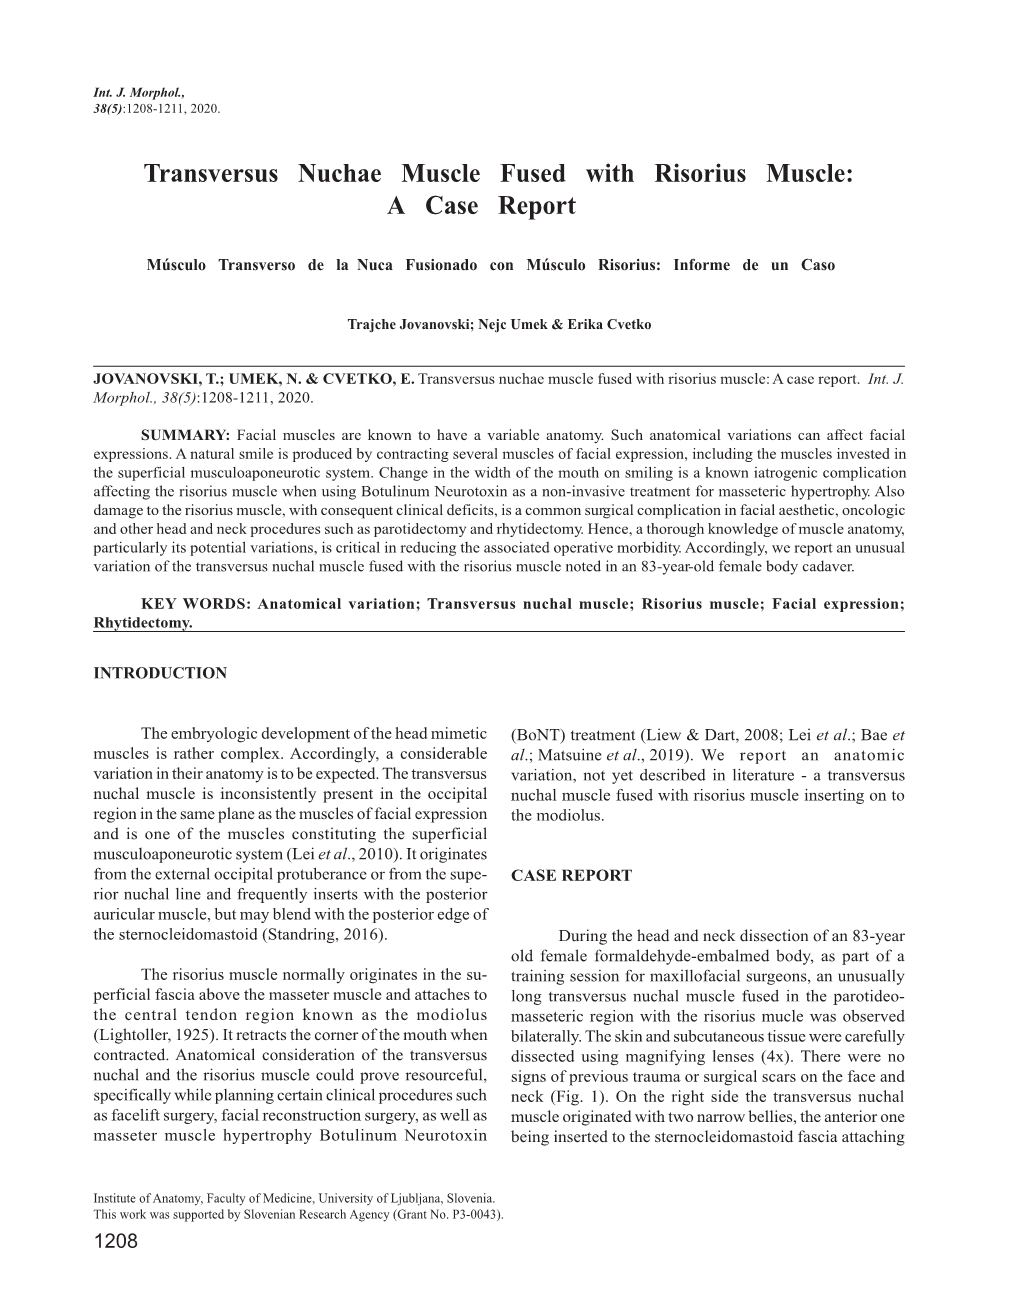 Transversus Nuchae Muscle Fused with Risorius Muscle: a Case Report